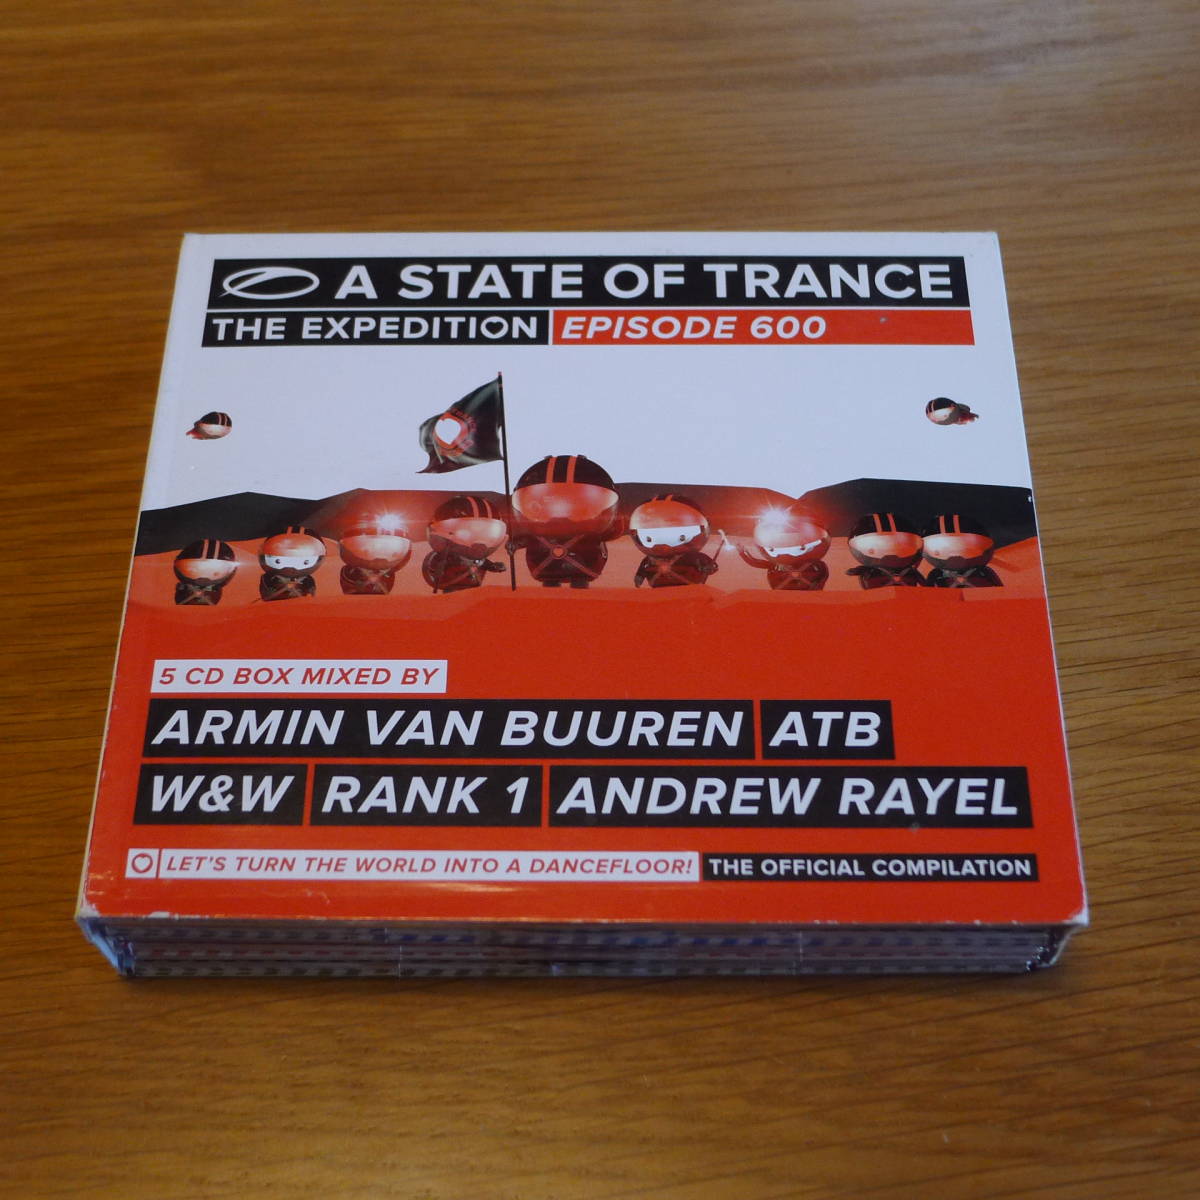 Armin van Buuren - A State Of Trance The Expedition 5枚組MixCD /ATB, W&W, Rank 1, Andrew Rayelの画像1